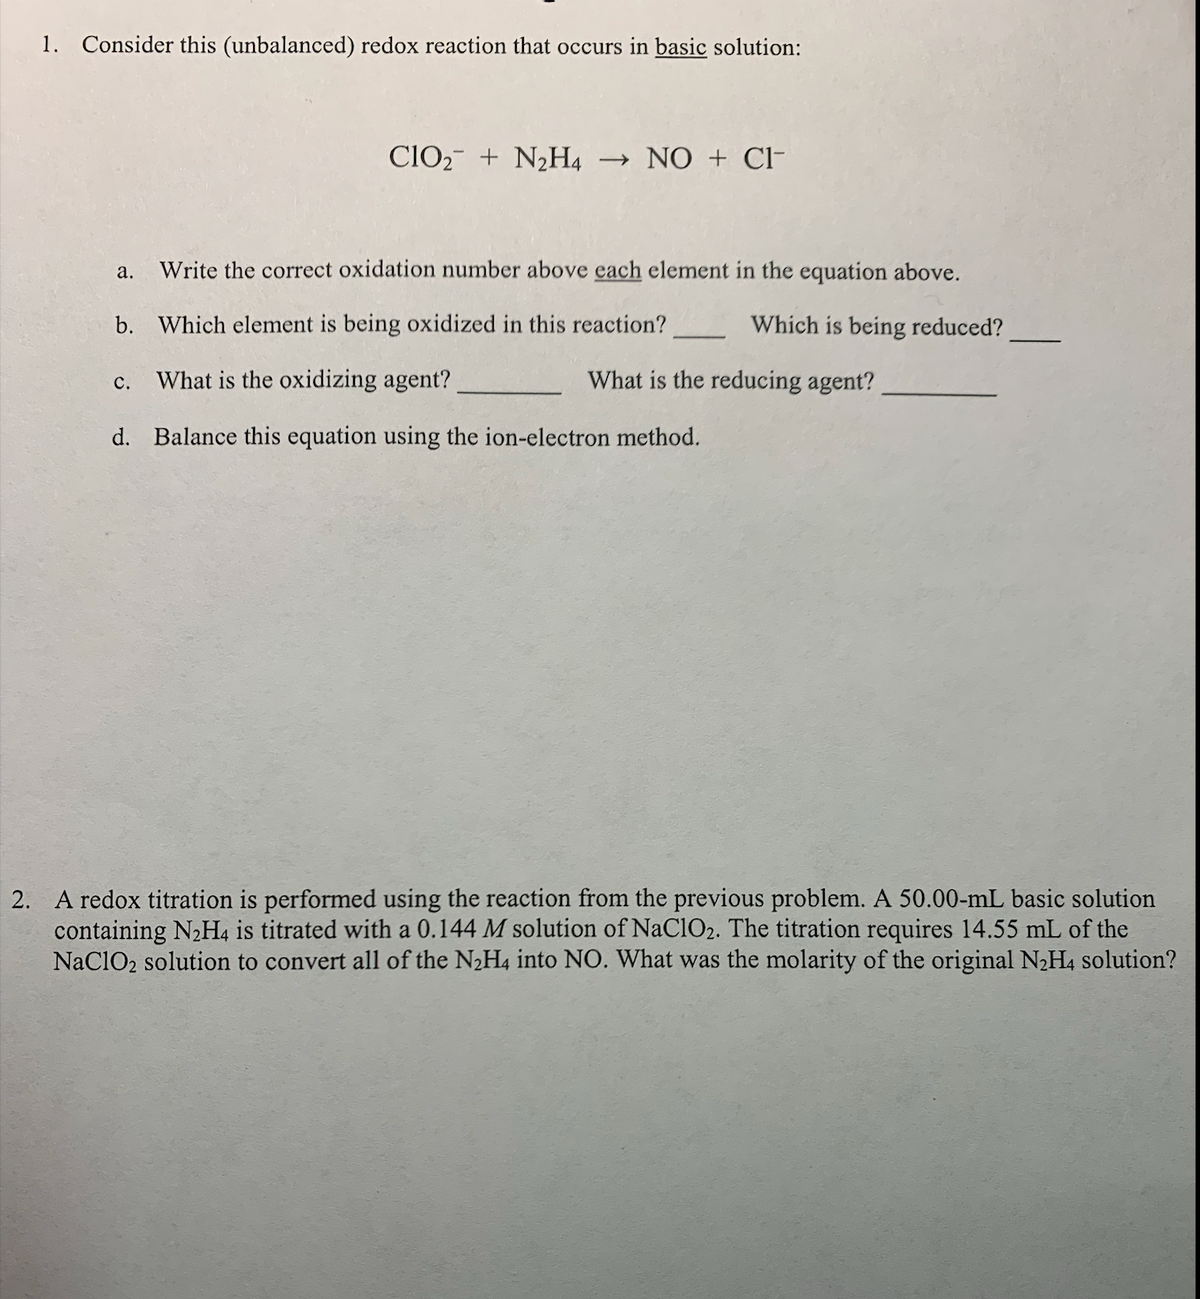 1. Consider this (unbalanced) redox reaction that occurs in basic solution:
ClO2- + N2H4
→ NO + Cl-
а.
Write the correct oxidation number above each element in the equation above.
b.
Which element is being oxidized in this reaction?
Which is being reduced?
What is the oxidizing agent?
What is the reducing agent?
с.
d. Balance this equation using the ion-electron method.
2. A redox titration is performed using the reaction from the previous problem. A 50.00-mL basic solution
containing N2H4 is titrated with a 0.144 M solution of NaClO2. The titration requires 14.55 mL of the
NaClO2 solution to convert all of the N2H4 into NO. What was the molarity of the original N2H4 solution?
